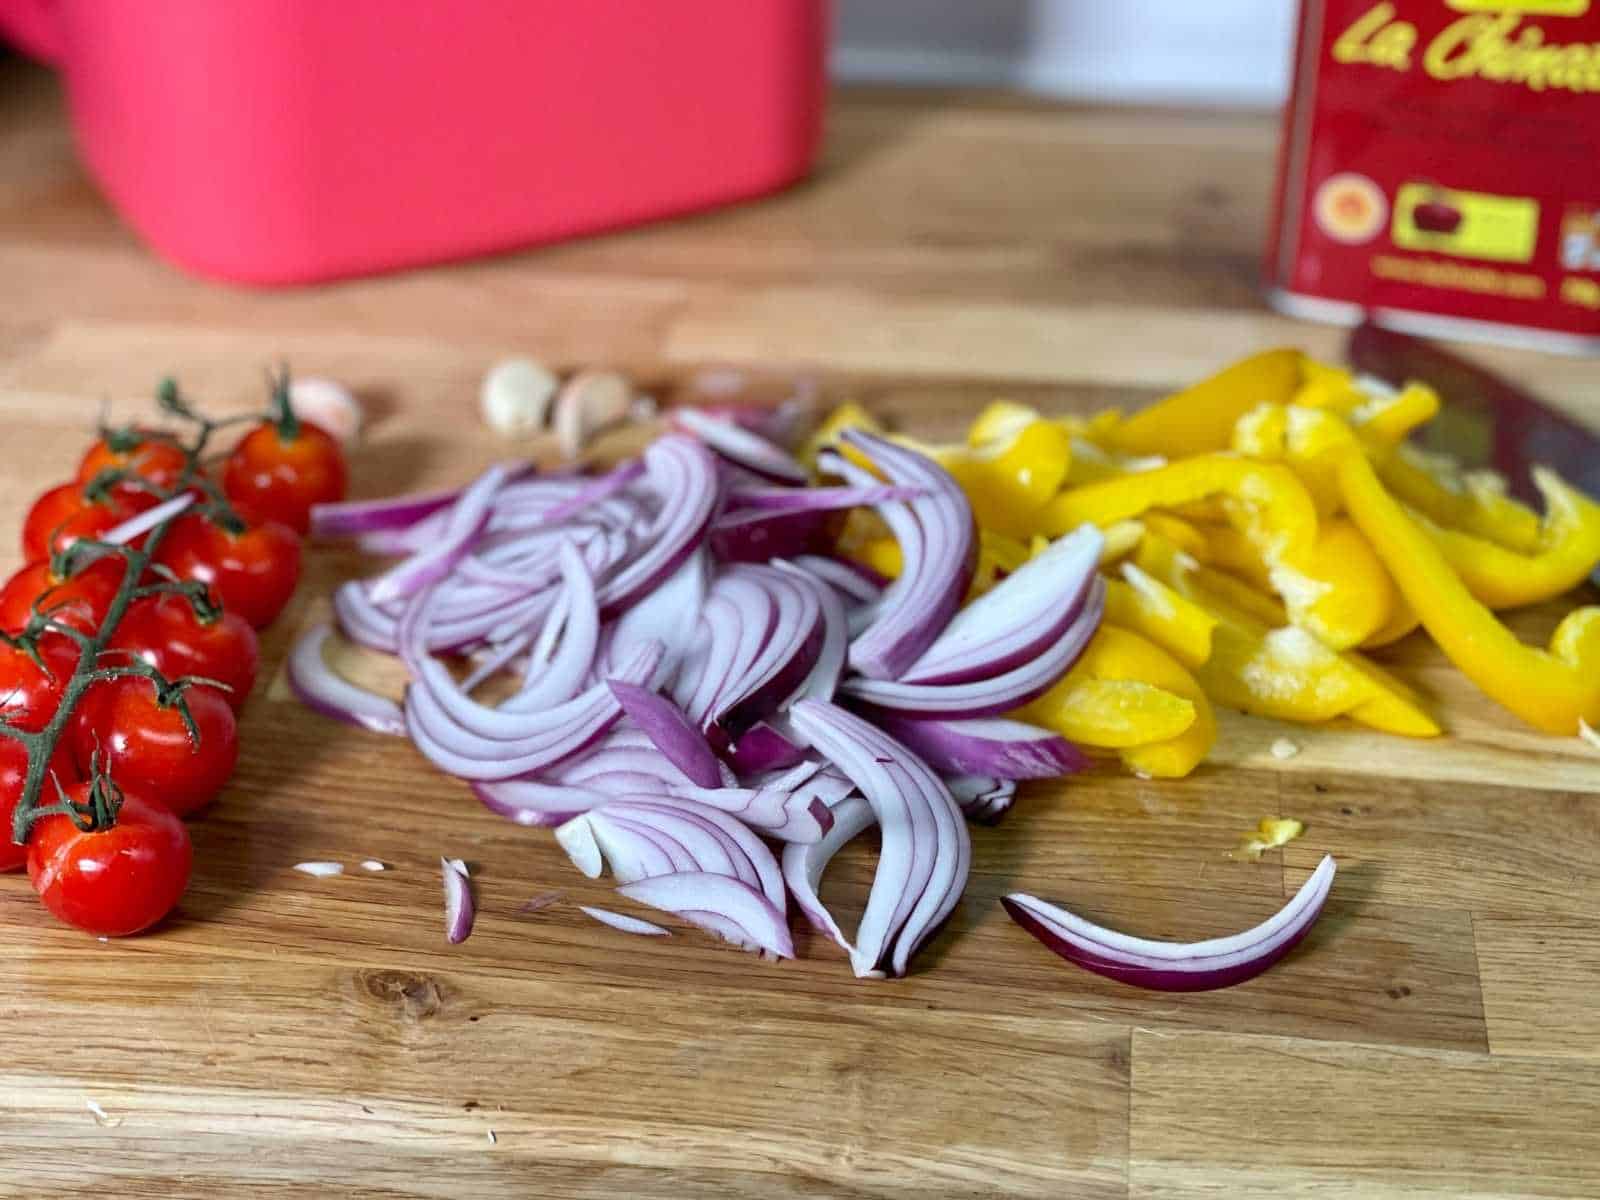 Ingredients for Air Fryer Roasted Vegetables laid out on a light coloured wooden chopping board: cherry tomatoes on the vine, sliced pepper and red onion, whole unpeeled garlic cloves